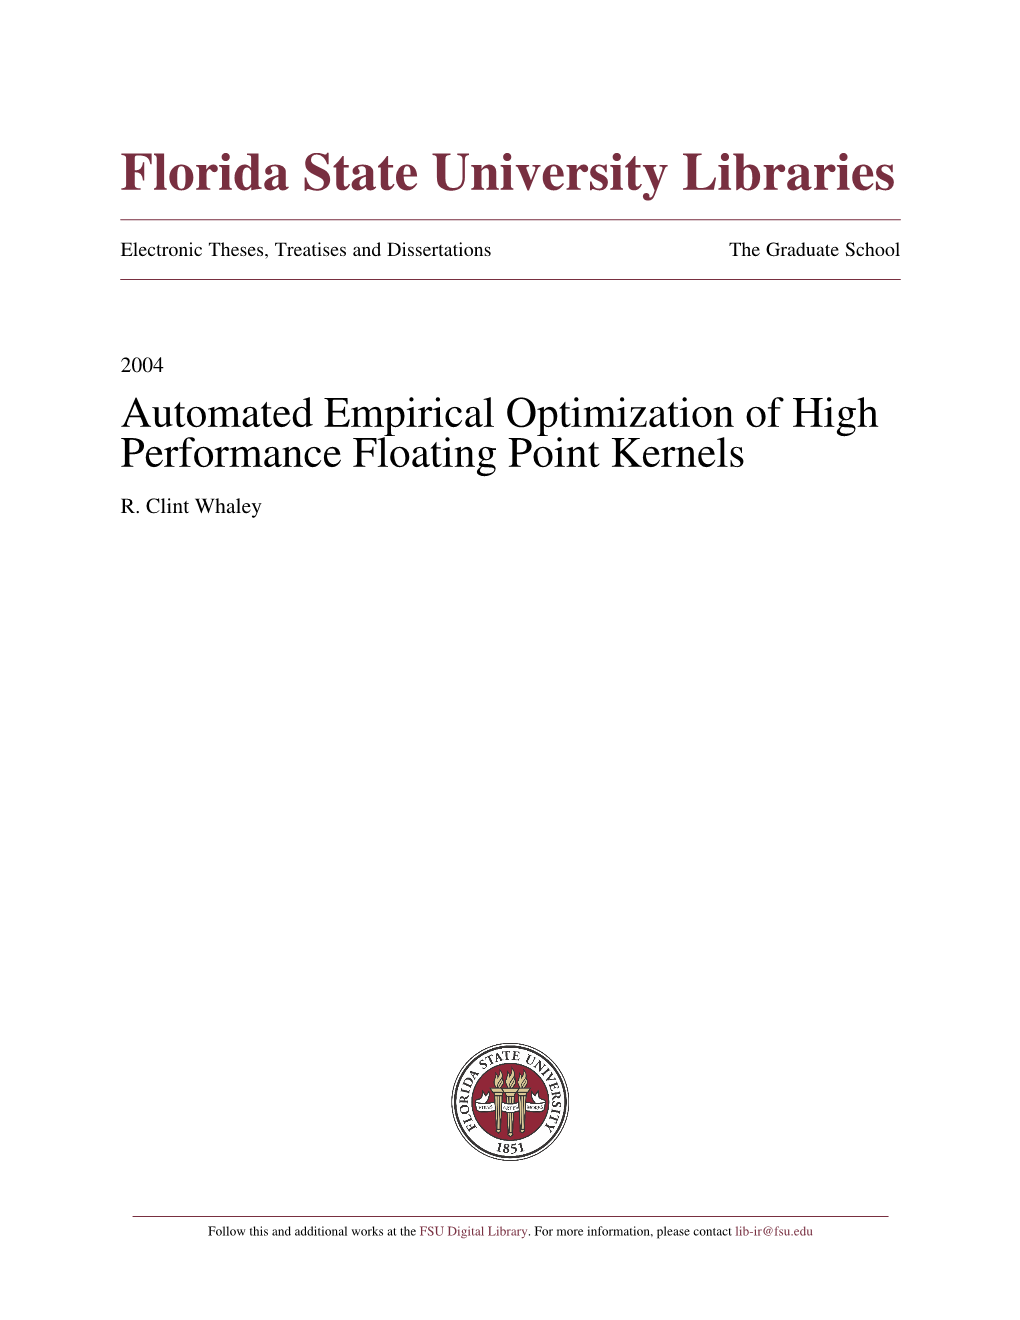 Automated Empirical Optimization of High Performance Floating Point Kernels R